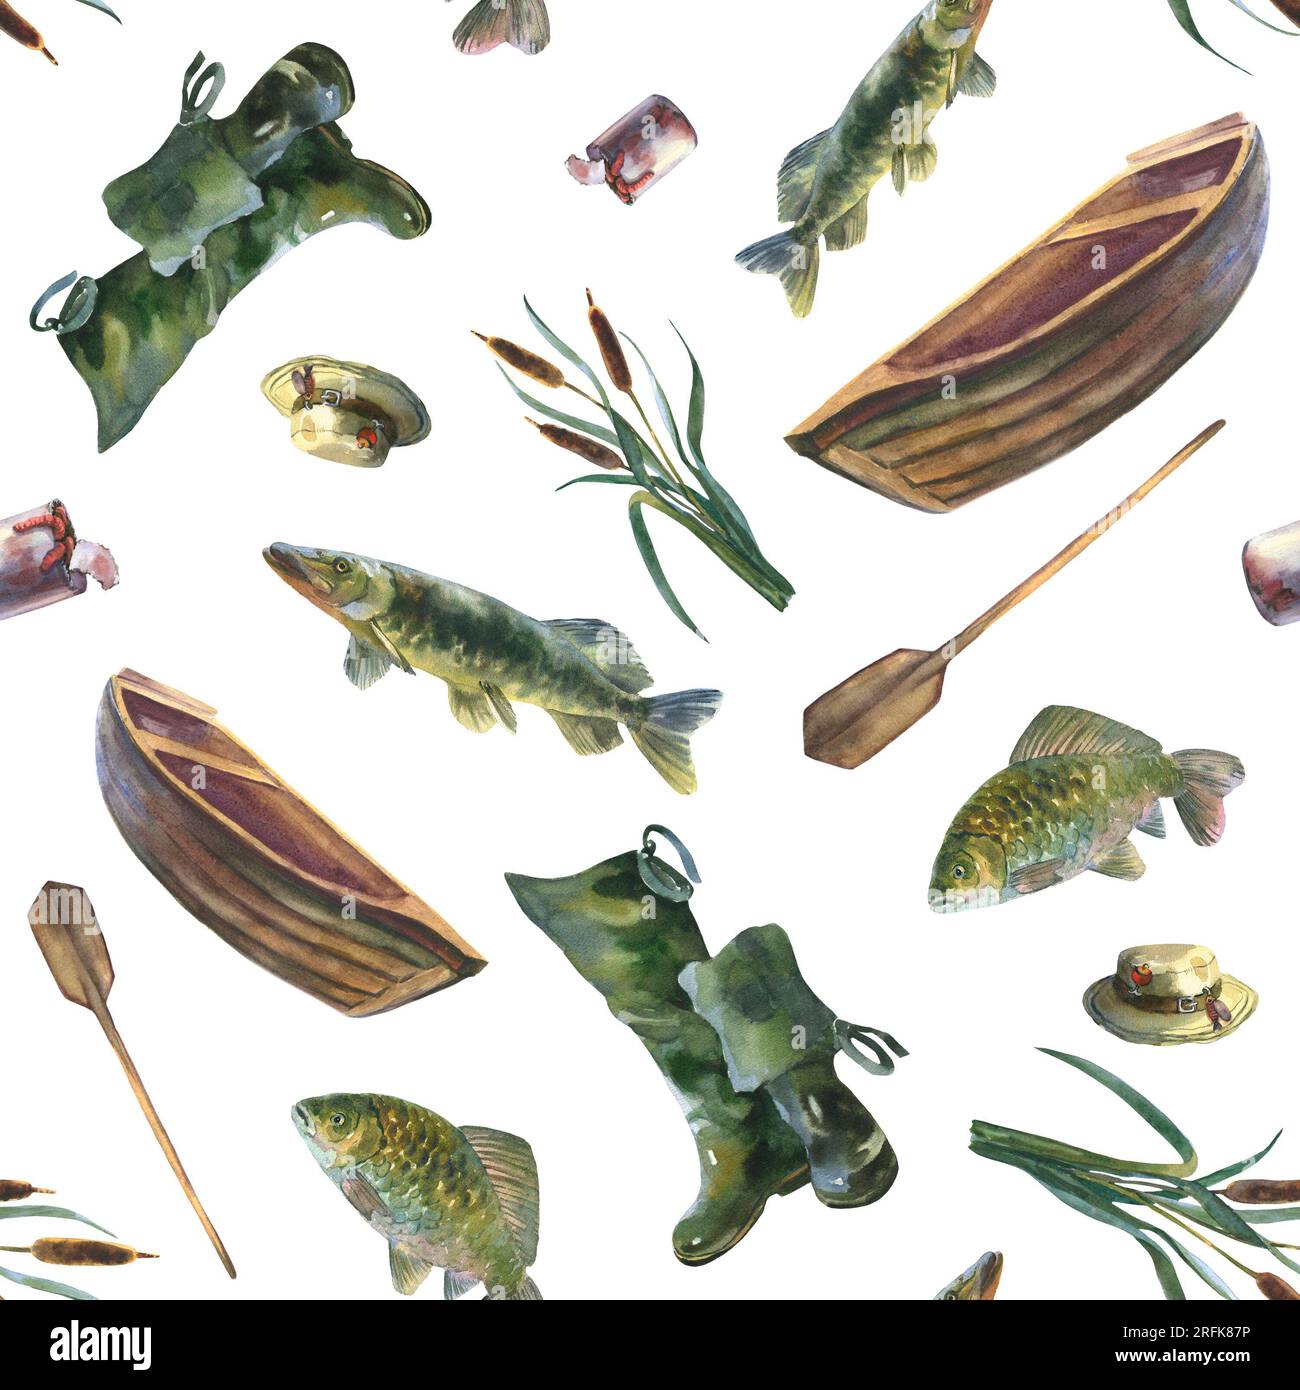 https://c8.alamy.com/comp/2RFK87P/watercolor-seamless-pattern-of-the-fishing-pike-carp-paddle-fishing-rod-hat-and-fisherman-is-fishing-with-a-bait-bucket-reed-isolated-on-white-2RFK87P.jpg